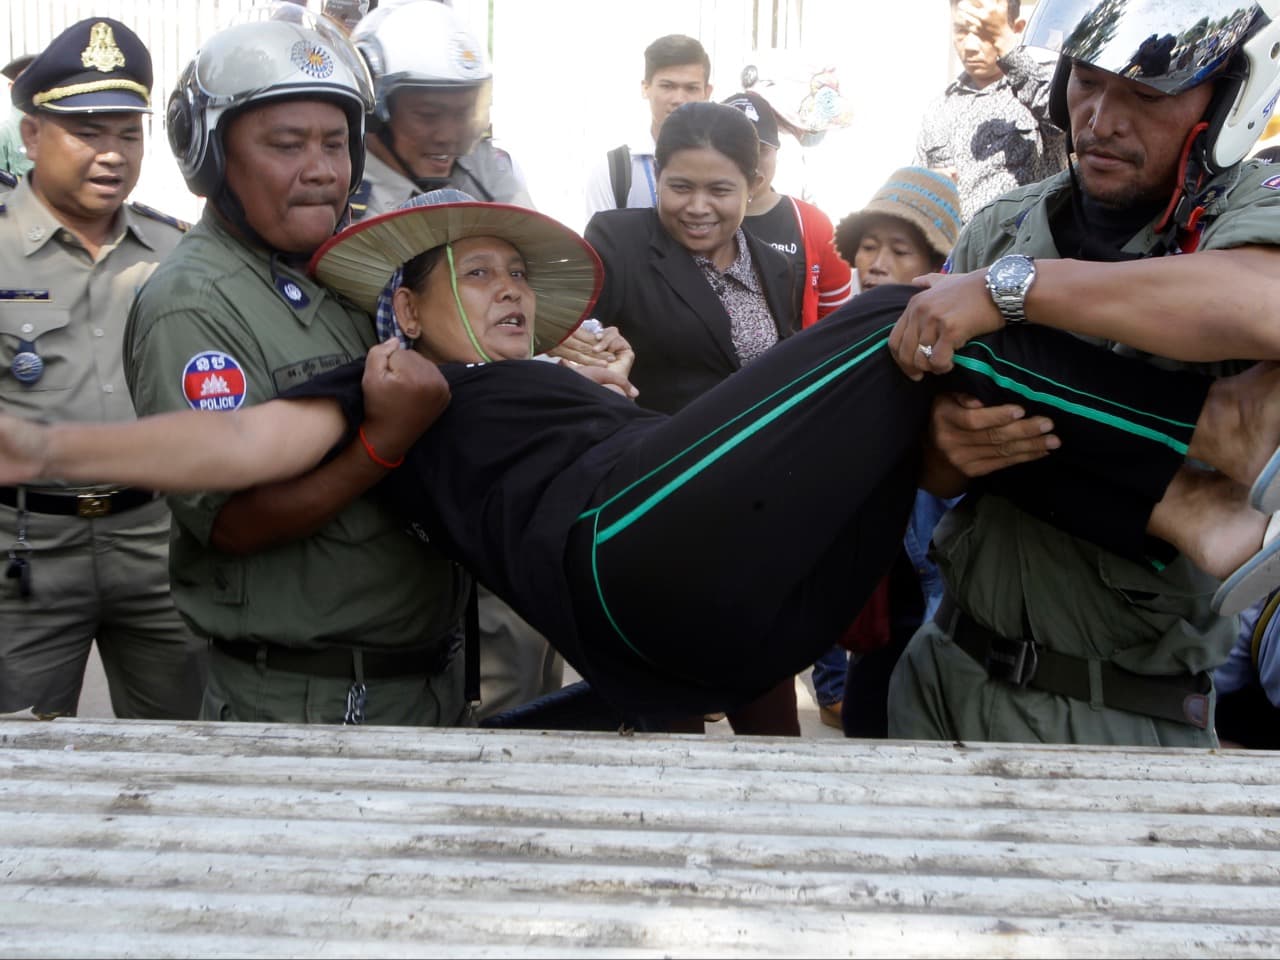 Riot police load an activist onto a truck during a protest against the detention of local human rights activists outside of an appeals court in Phnom Penh, 13 June 2016, AP Photo/Heng Sinith